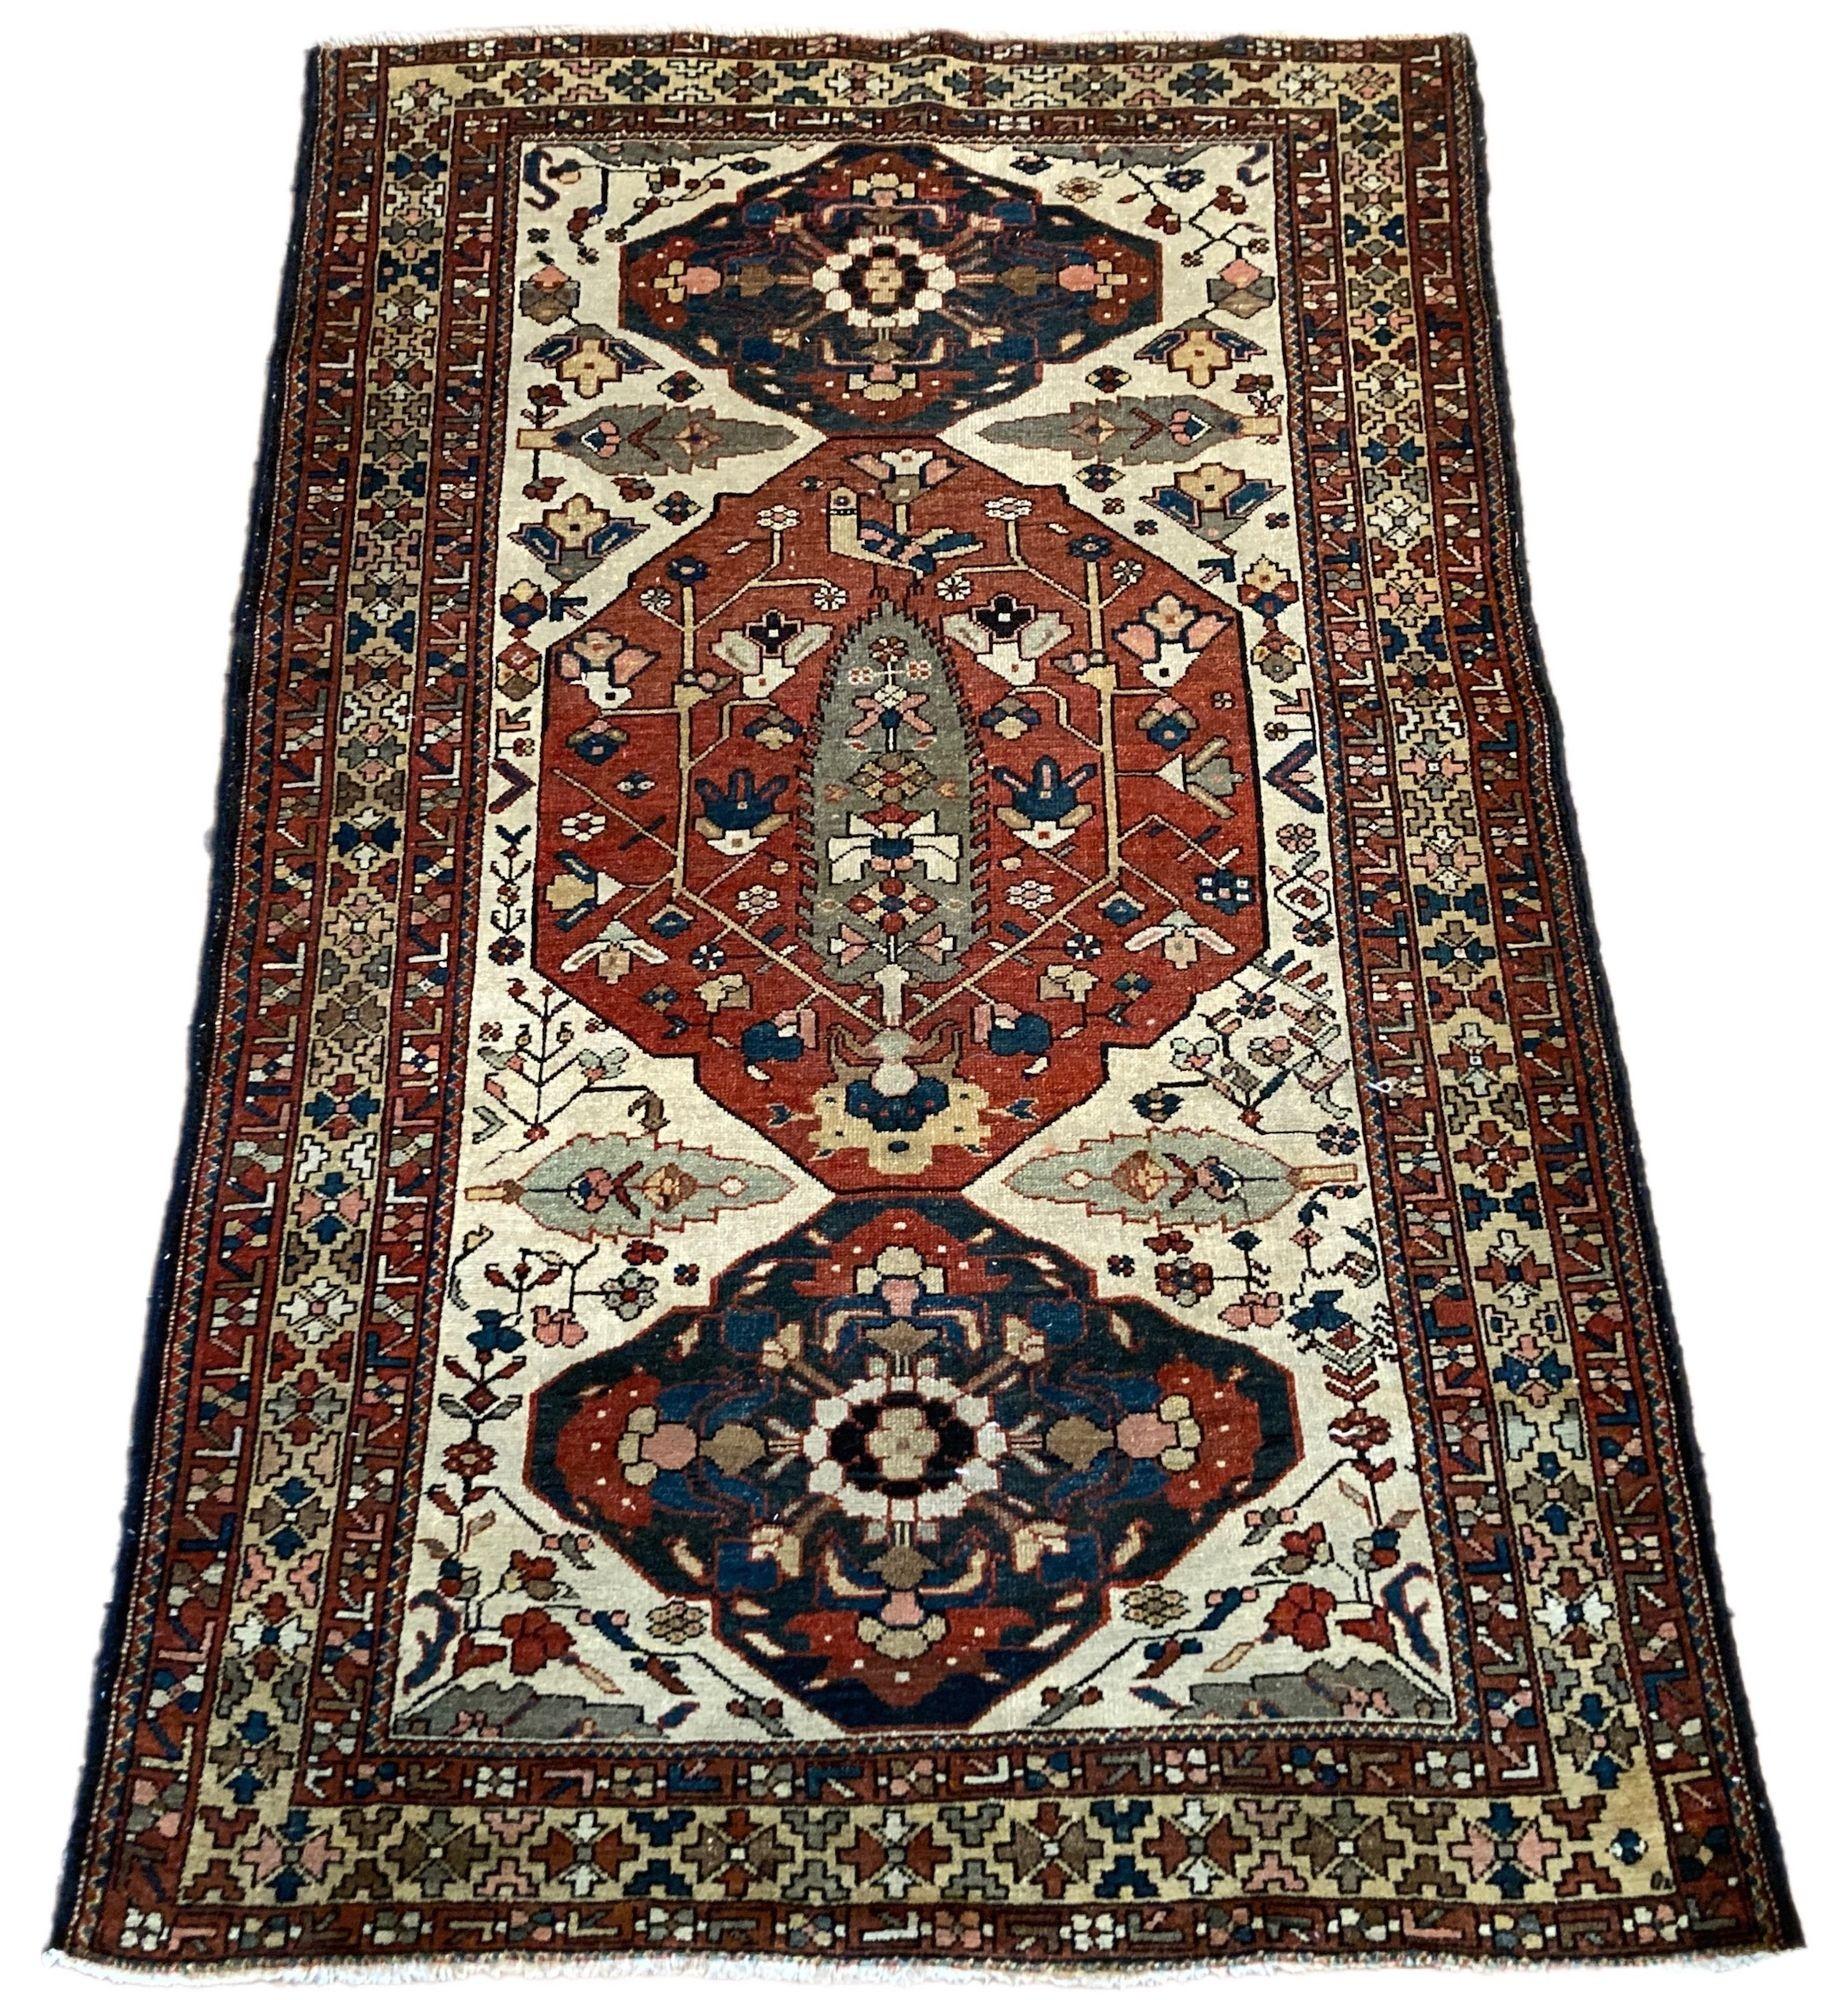 A fabulous antique Bakhtiar rug, handwoven circa 1900. The design features a terracotta medallion with a central cypress tree flanked by two smaller indigo medallions on a rare ivory field. A beautifully simple design with great secondary colours of